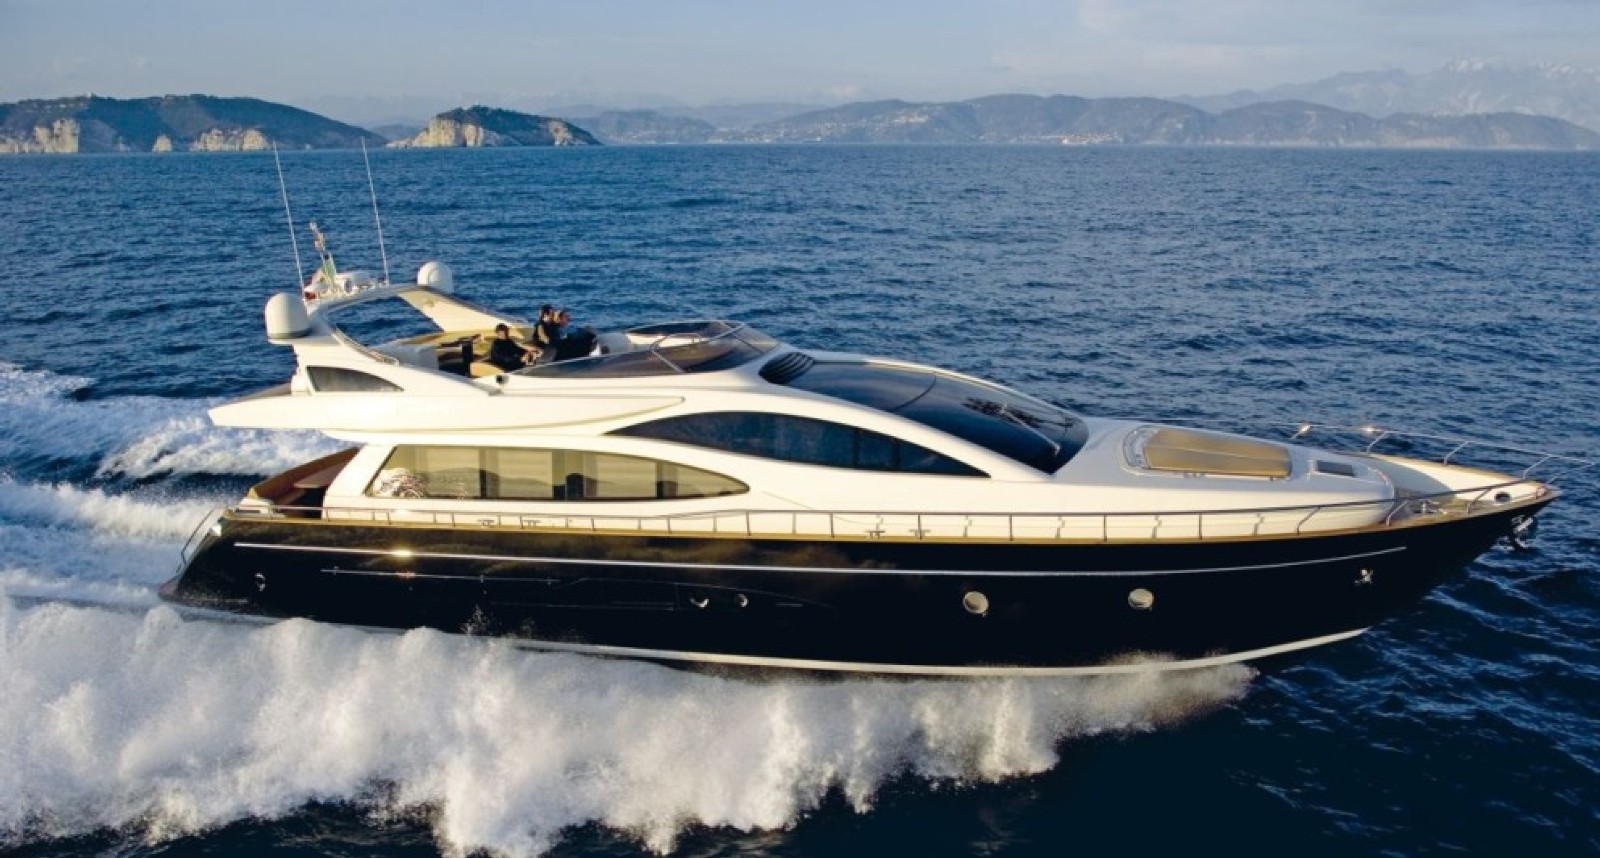 VENERE - Motor Boat Charter France & Boat hire in France French Riviera Antibes 1